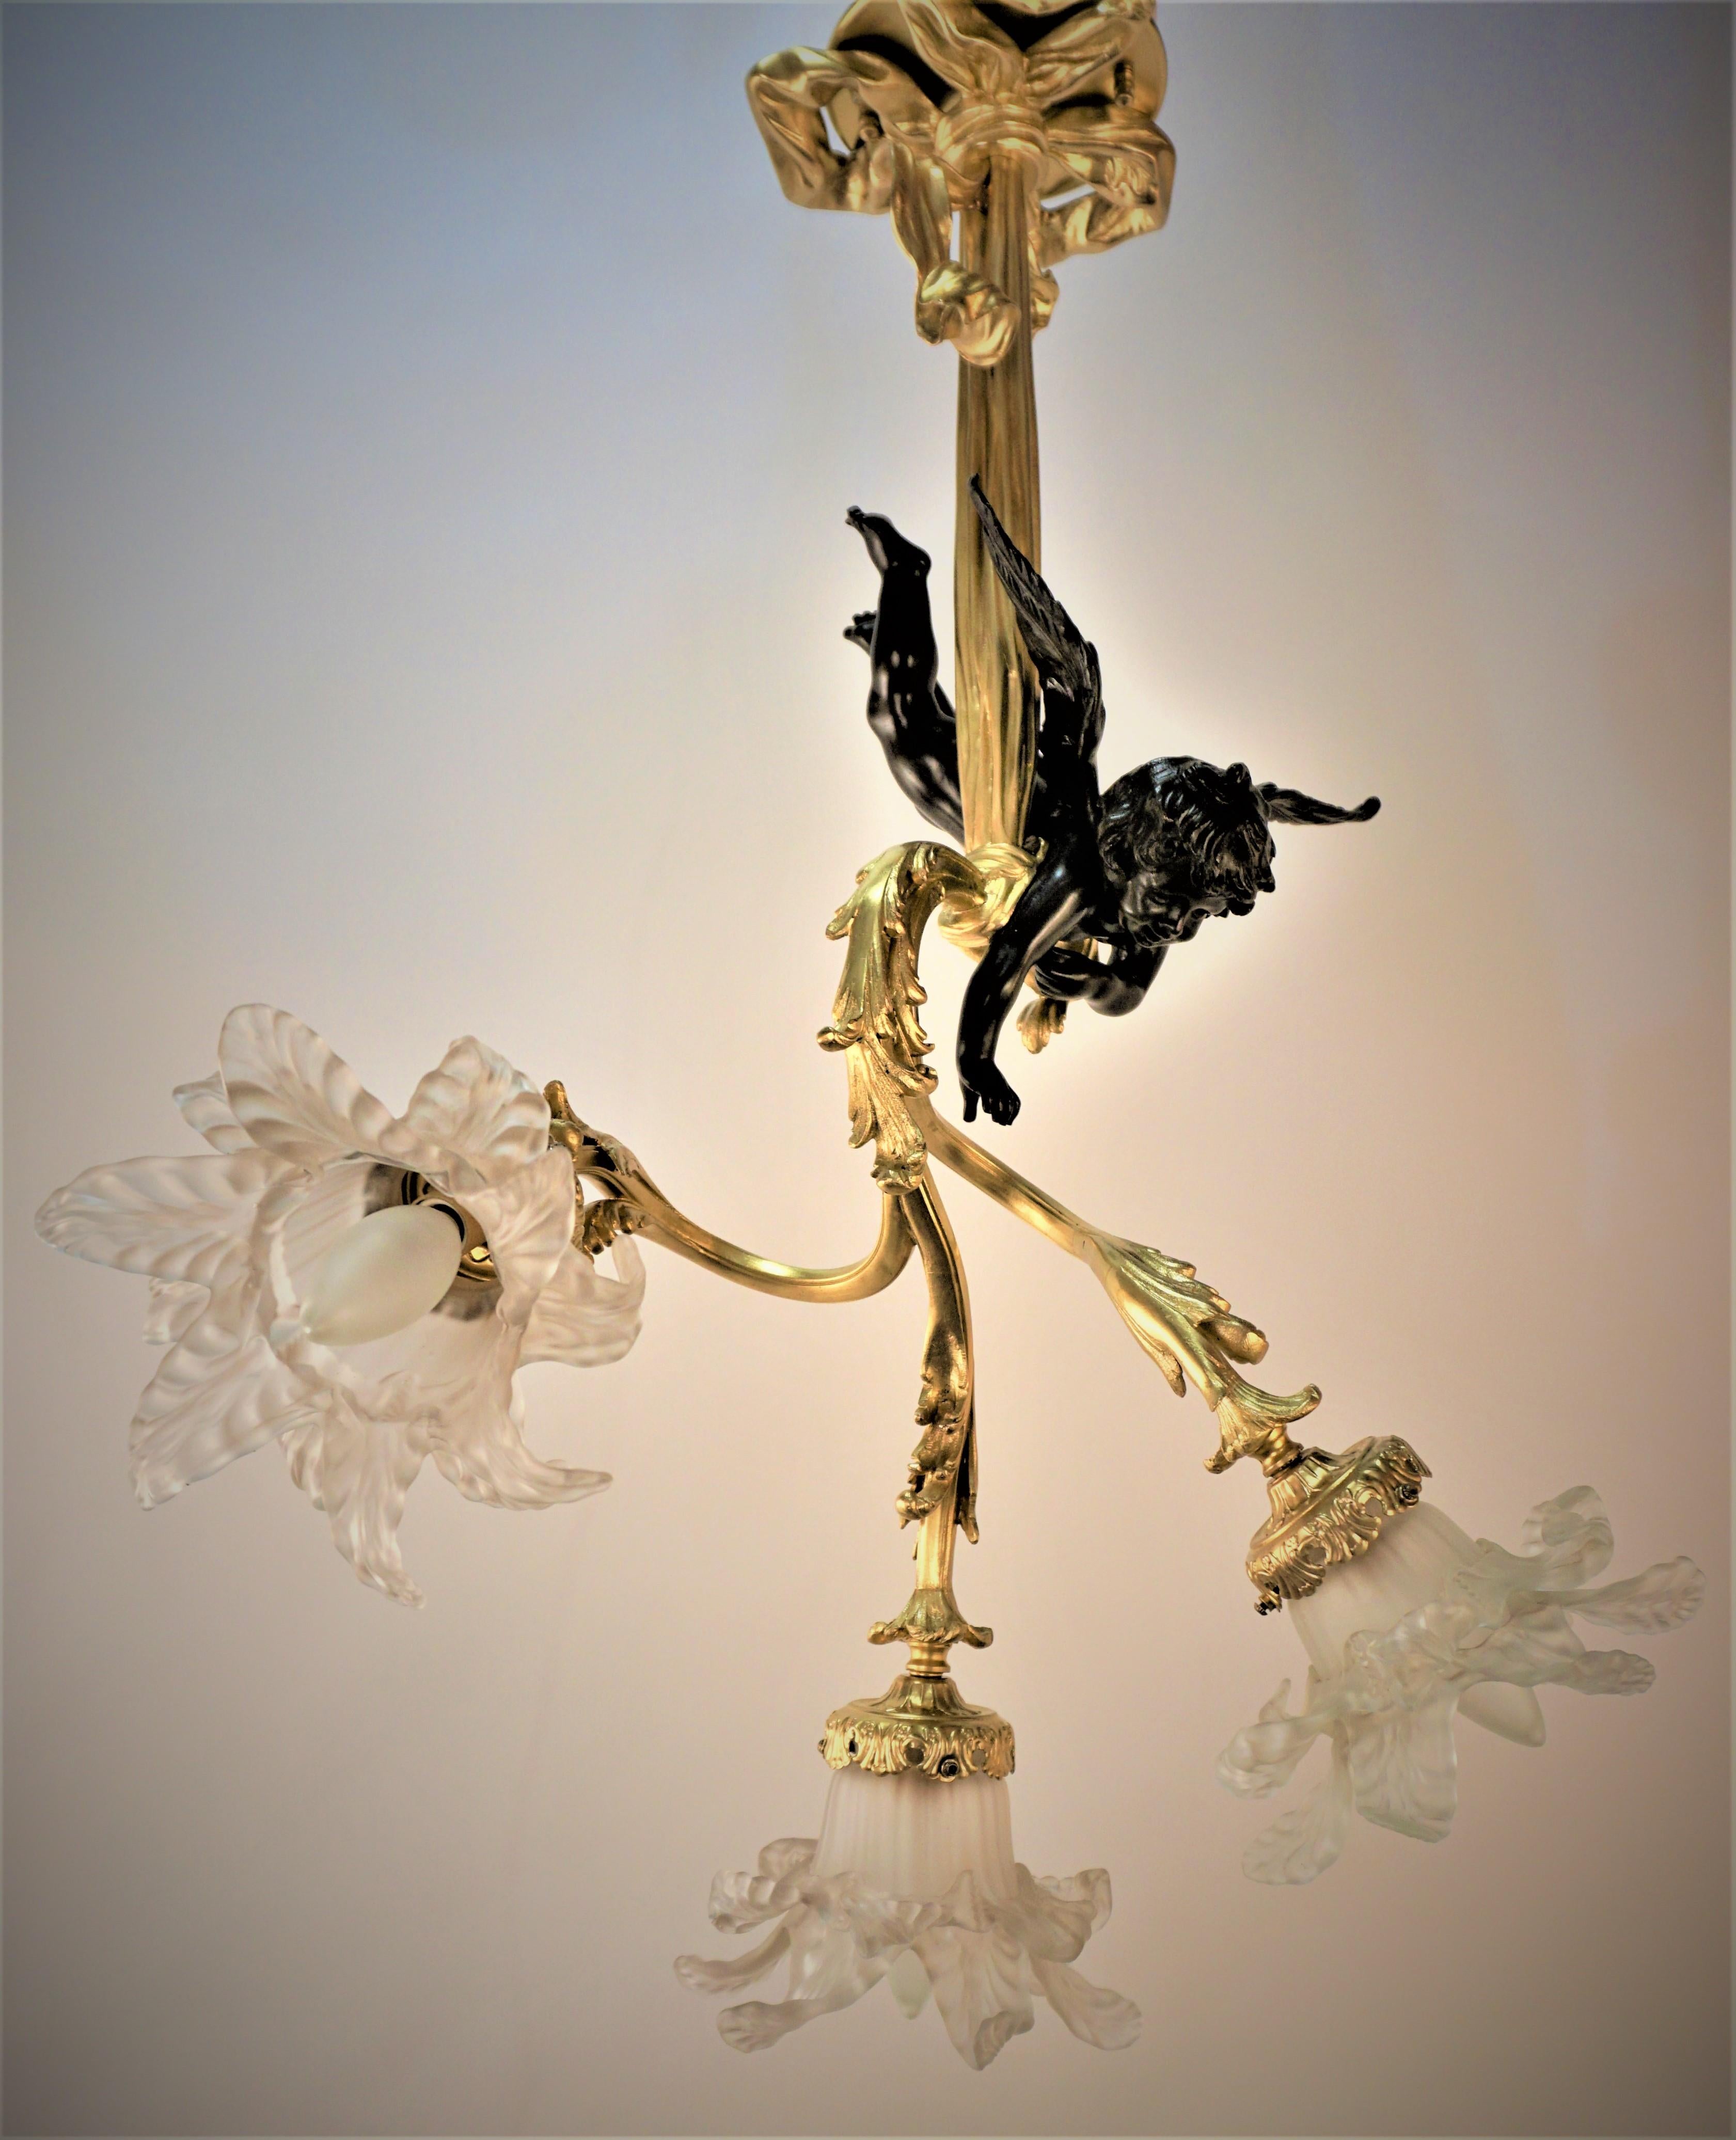 Gilt and bronze, patinated bronze cherub holding branches with hand blown glass flora shades.
Professionally rewired and ready for installation.